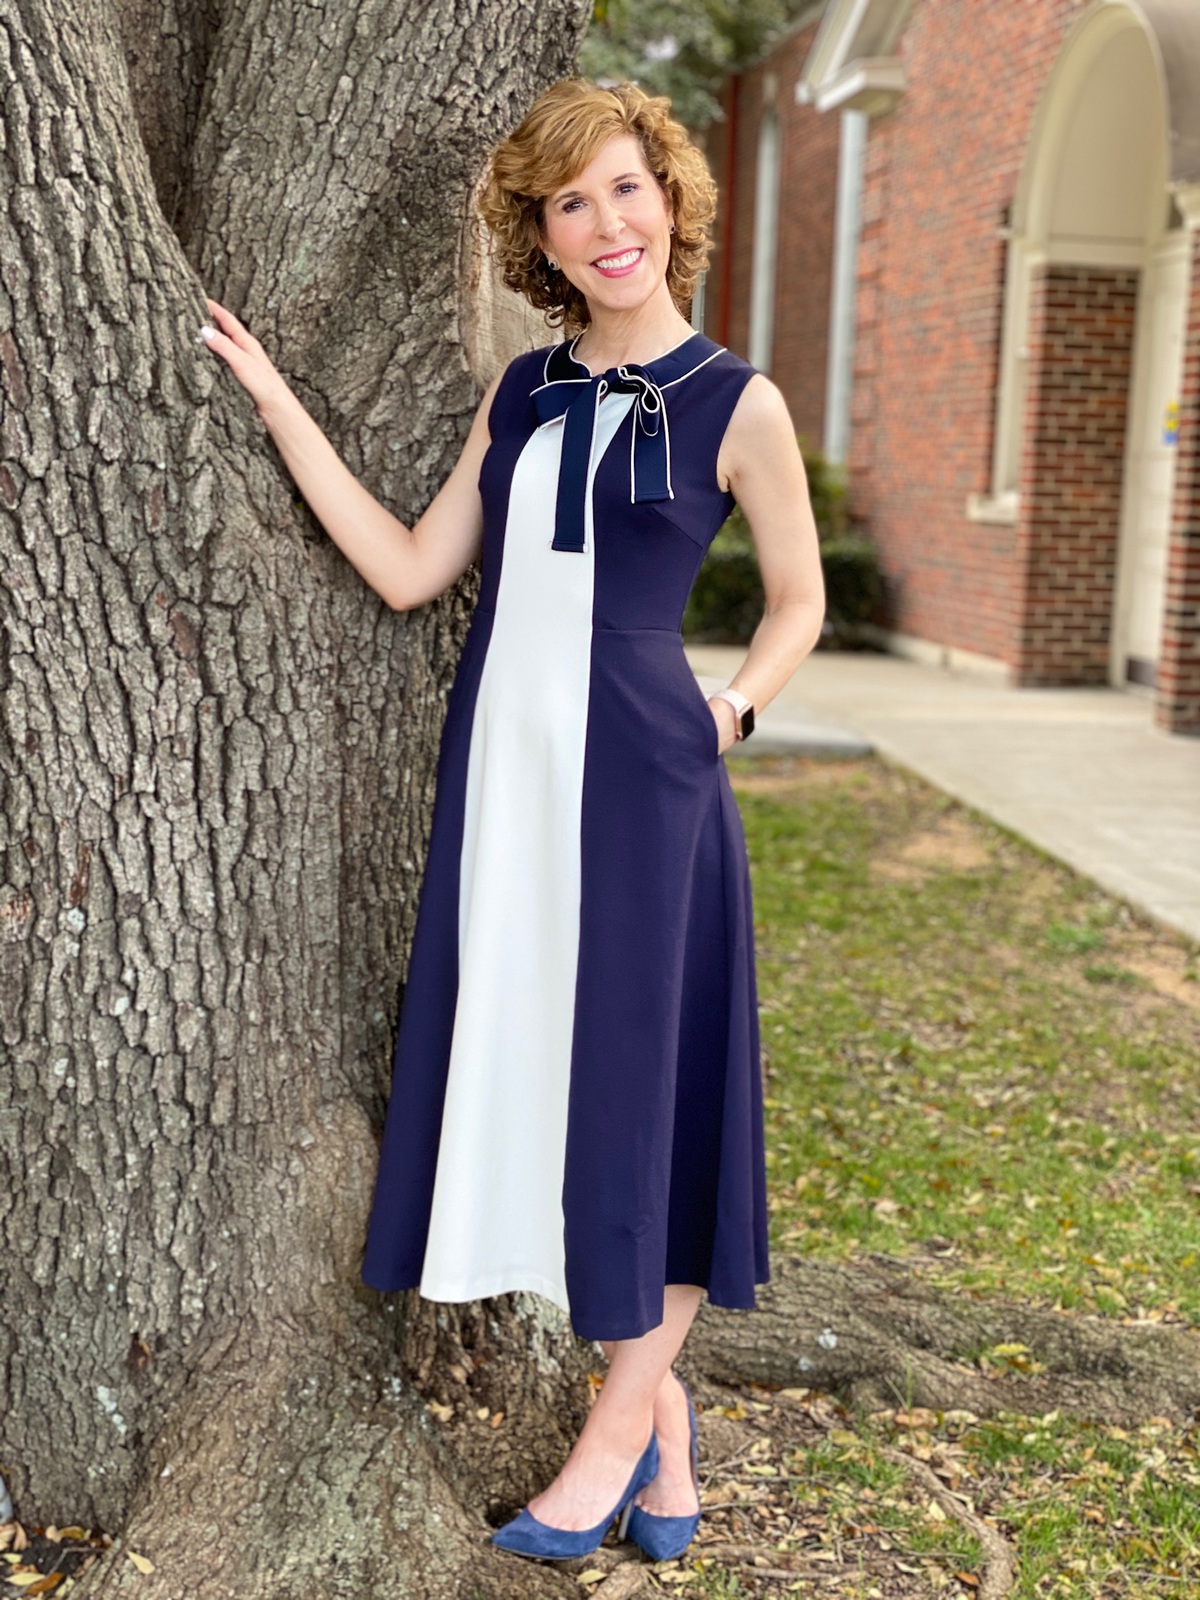 woman over 50 wearing navy and cream dress standing by a tree